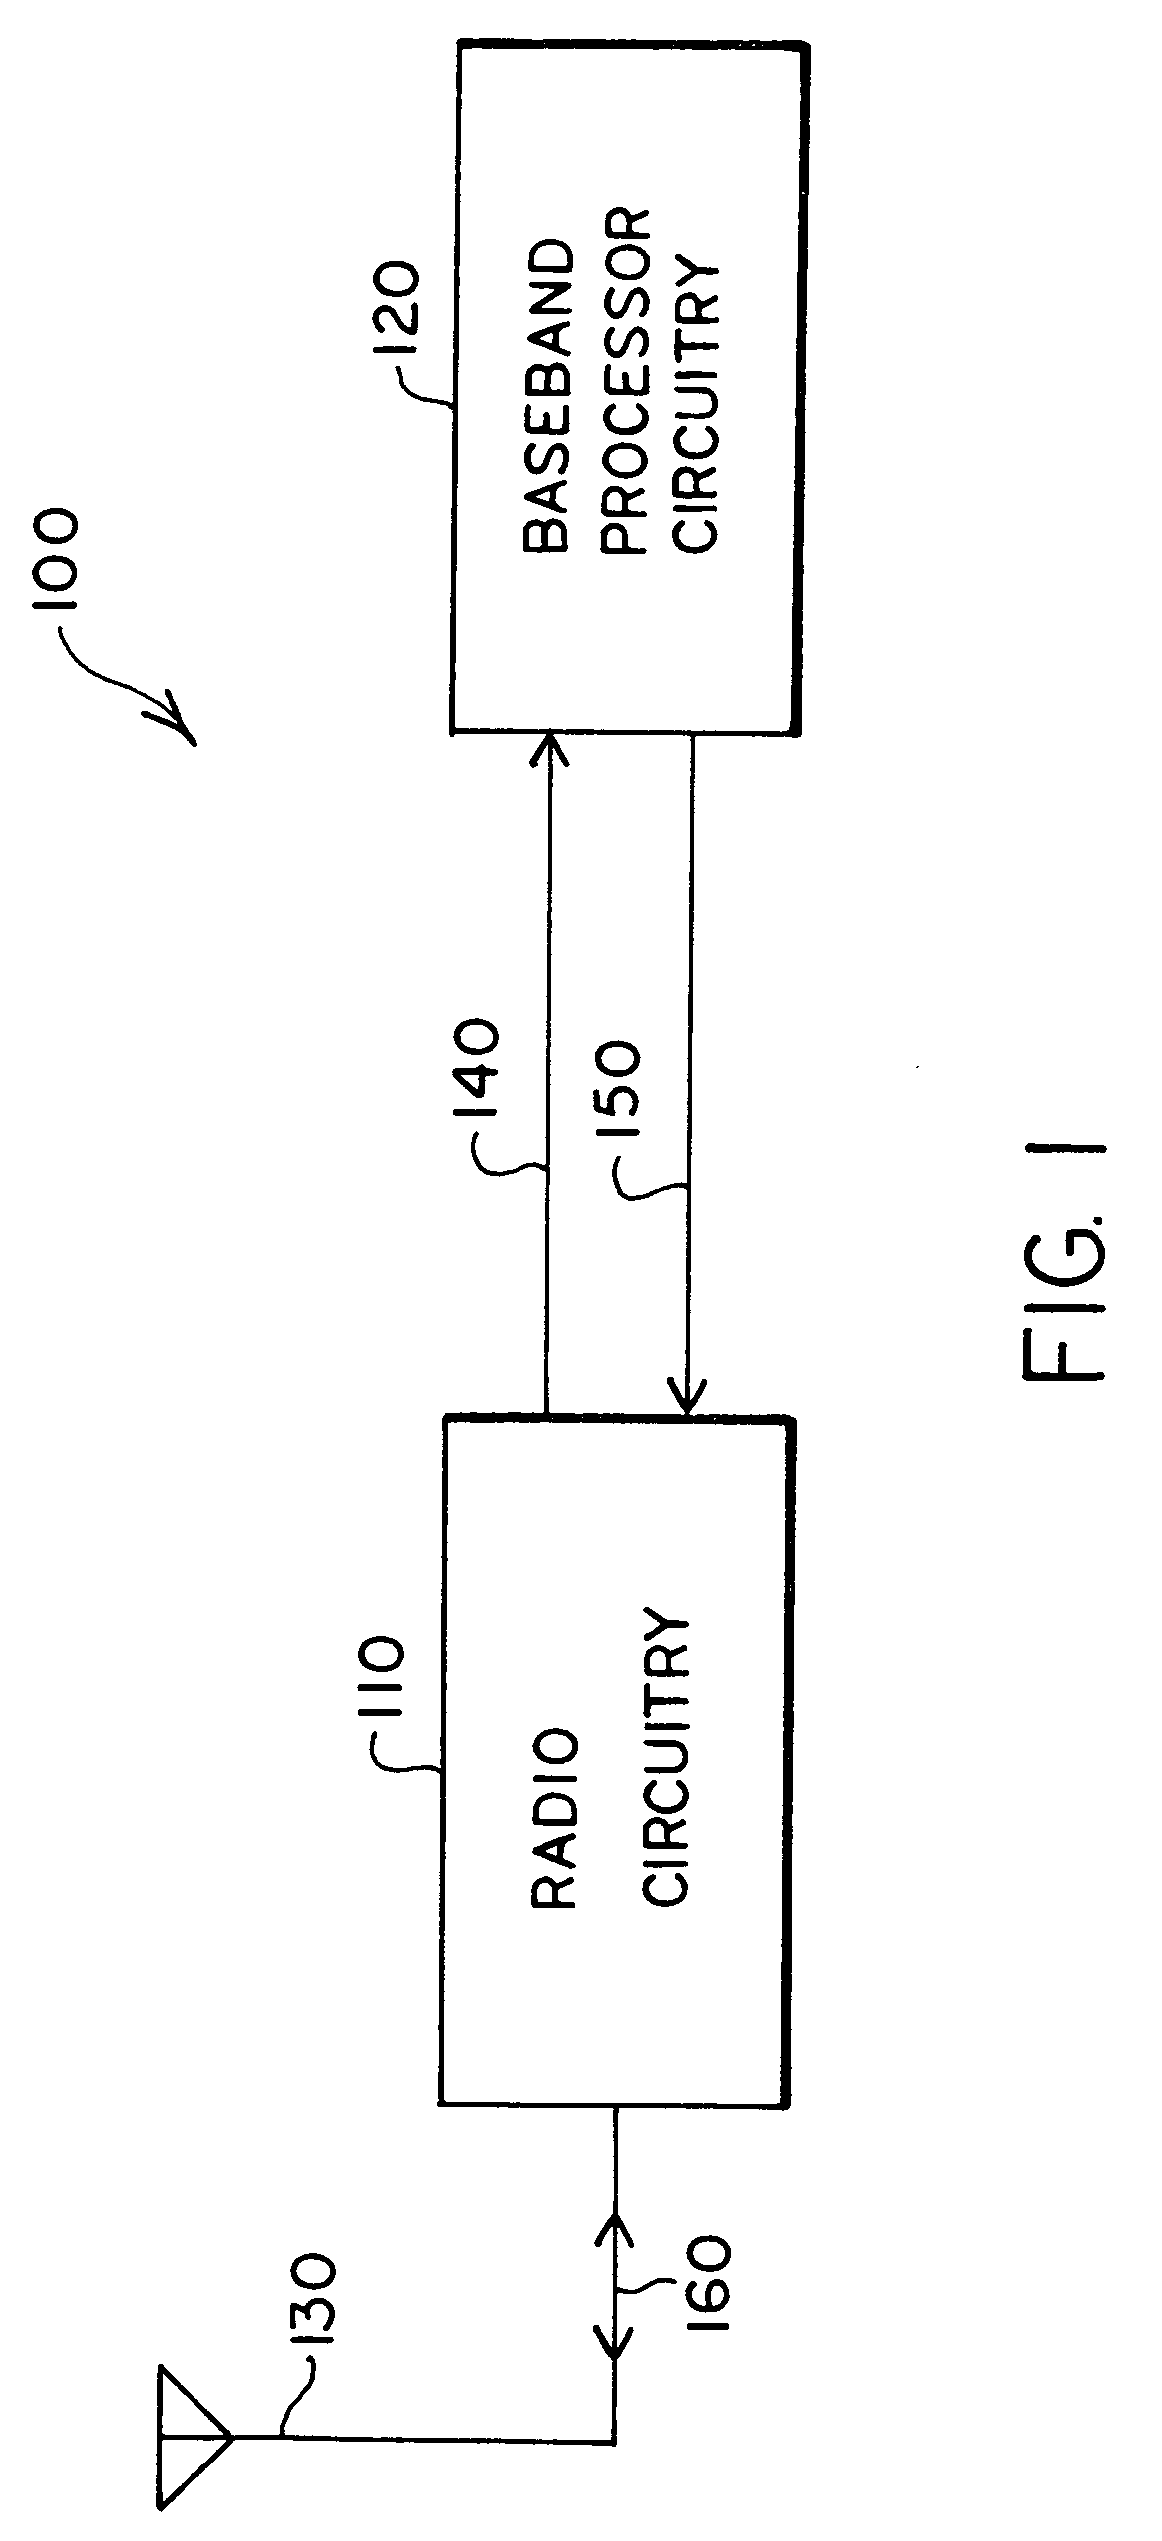 Frequency modification circuitry for use in radio-frequency communication apparatus and associated methods